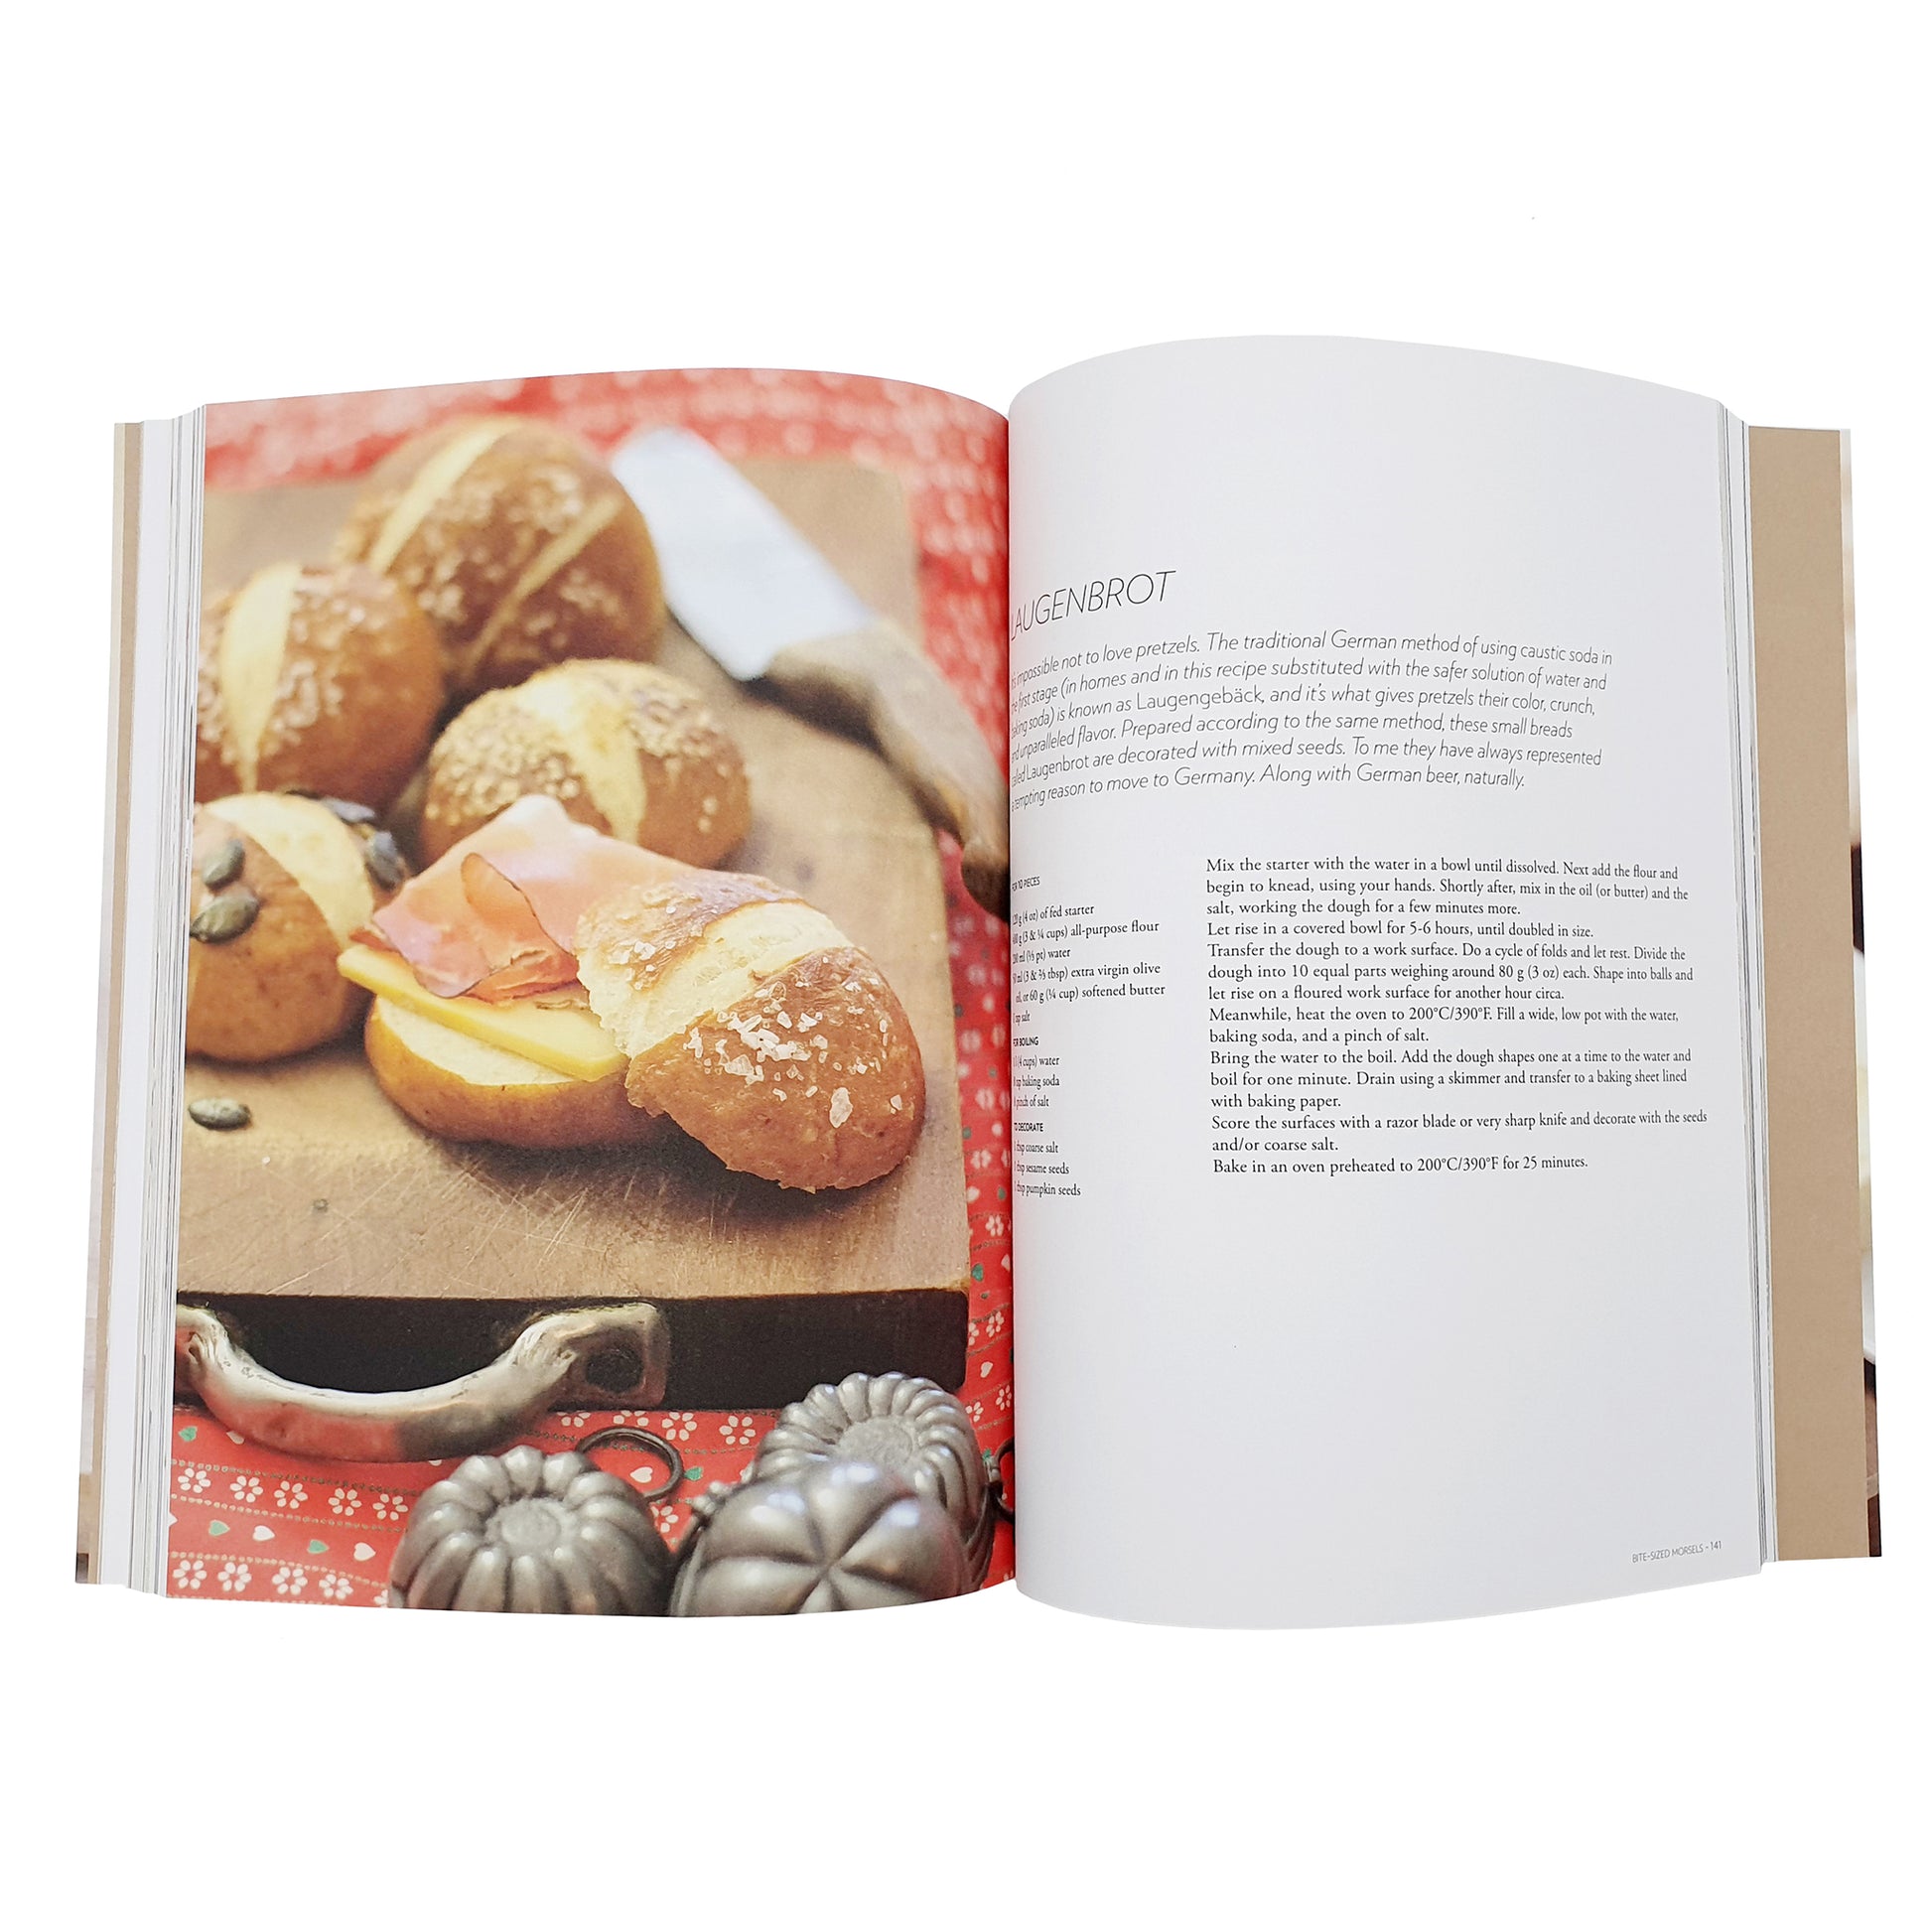 recipe from complete guide to sourdough book